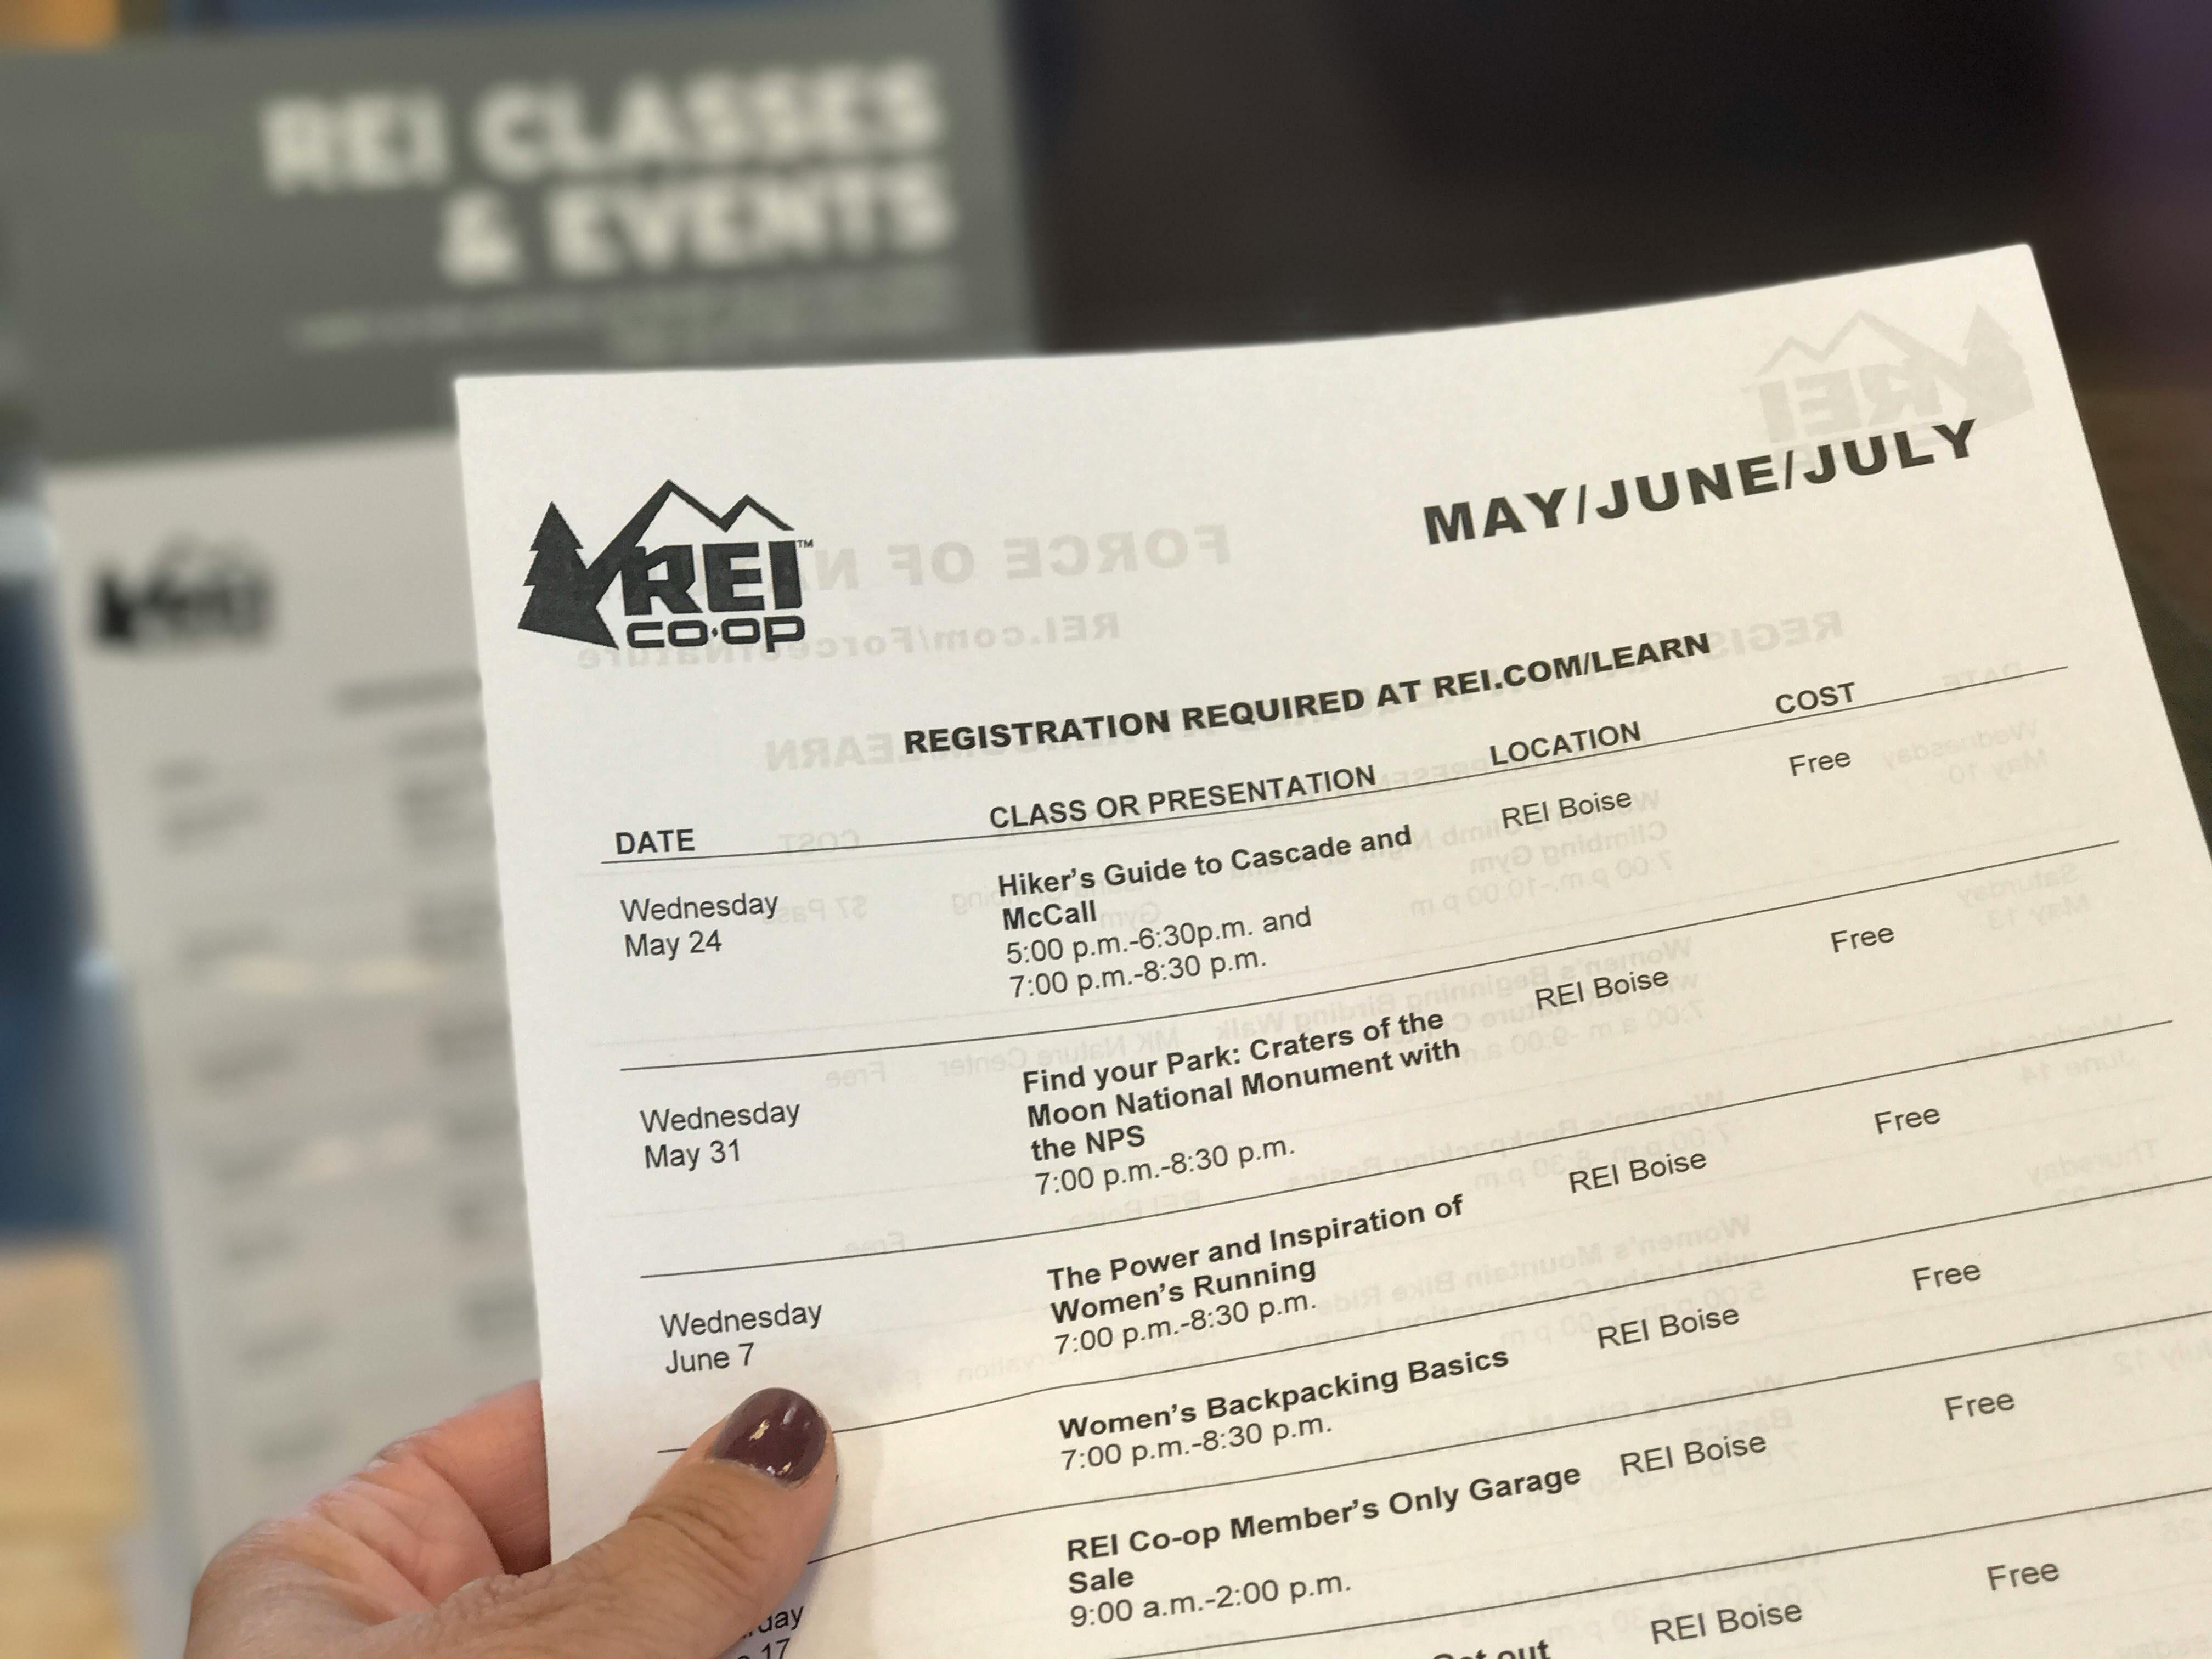 A person's hand holding a piece of paper with REI's schedule of classes and presentations for the months of May, June, and July.